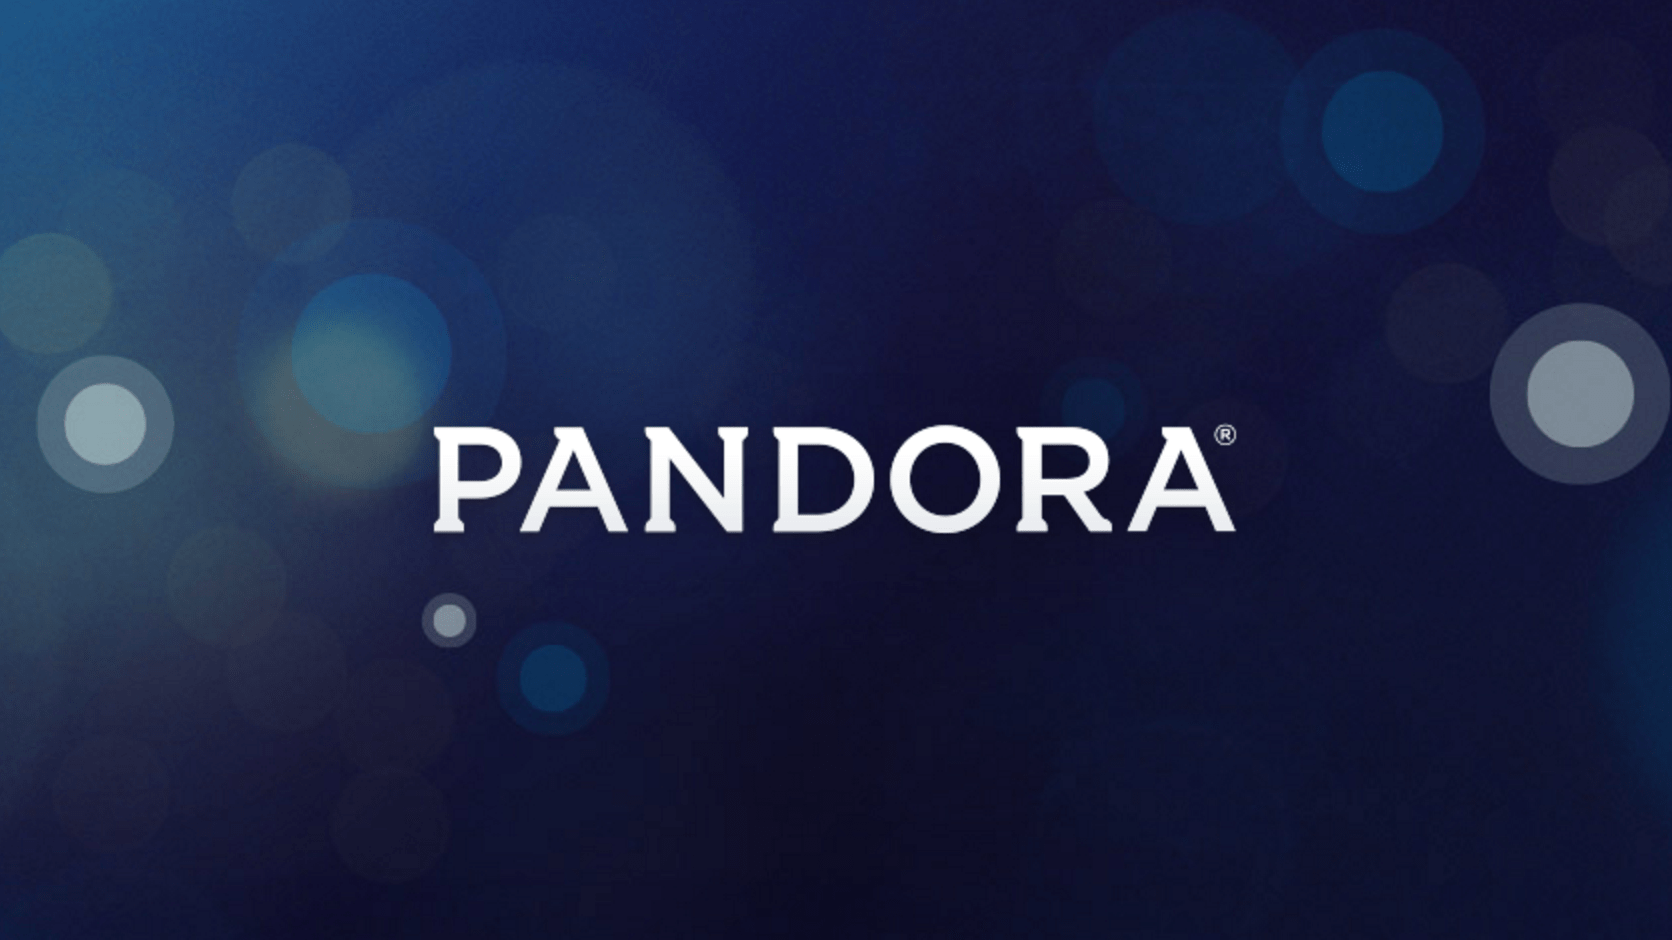 Pandora Radio Logo - Best Pandora VPN for 2019 - How to Listen Abroad From Any Country